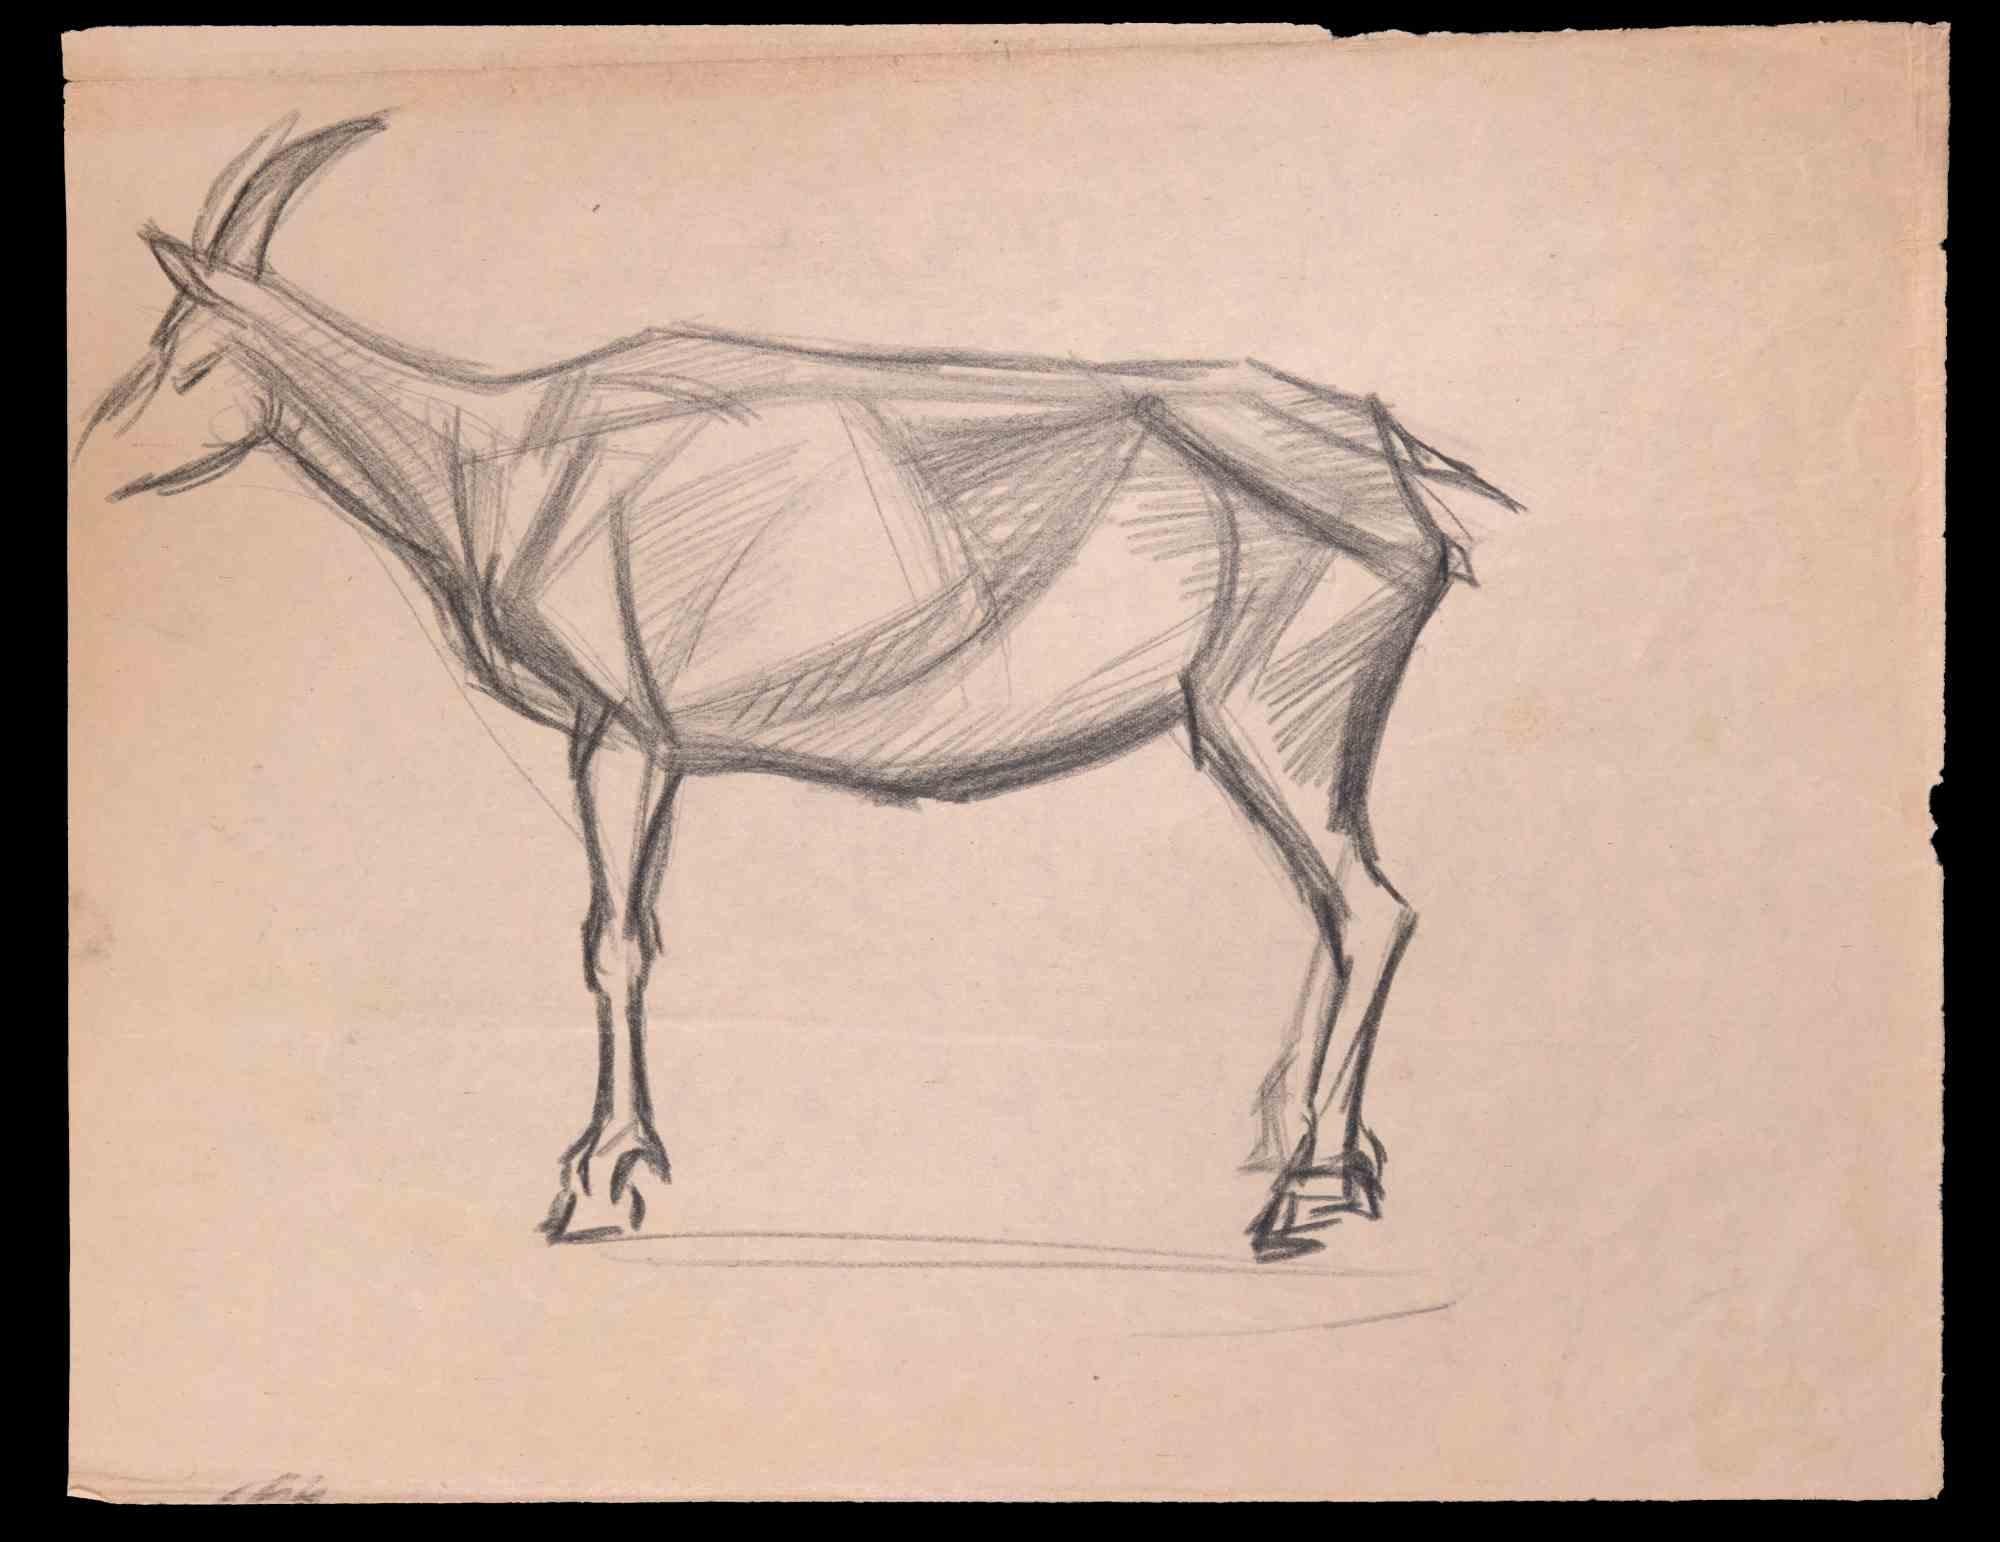 Unknown Figurative Art - The Goat - Original Drawing - Early 20th Century